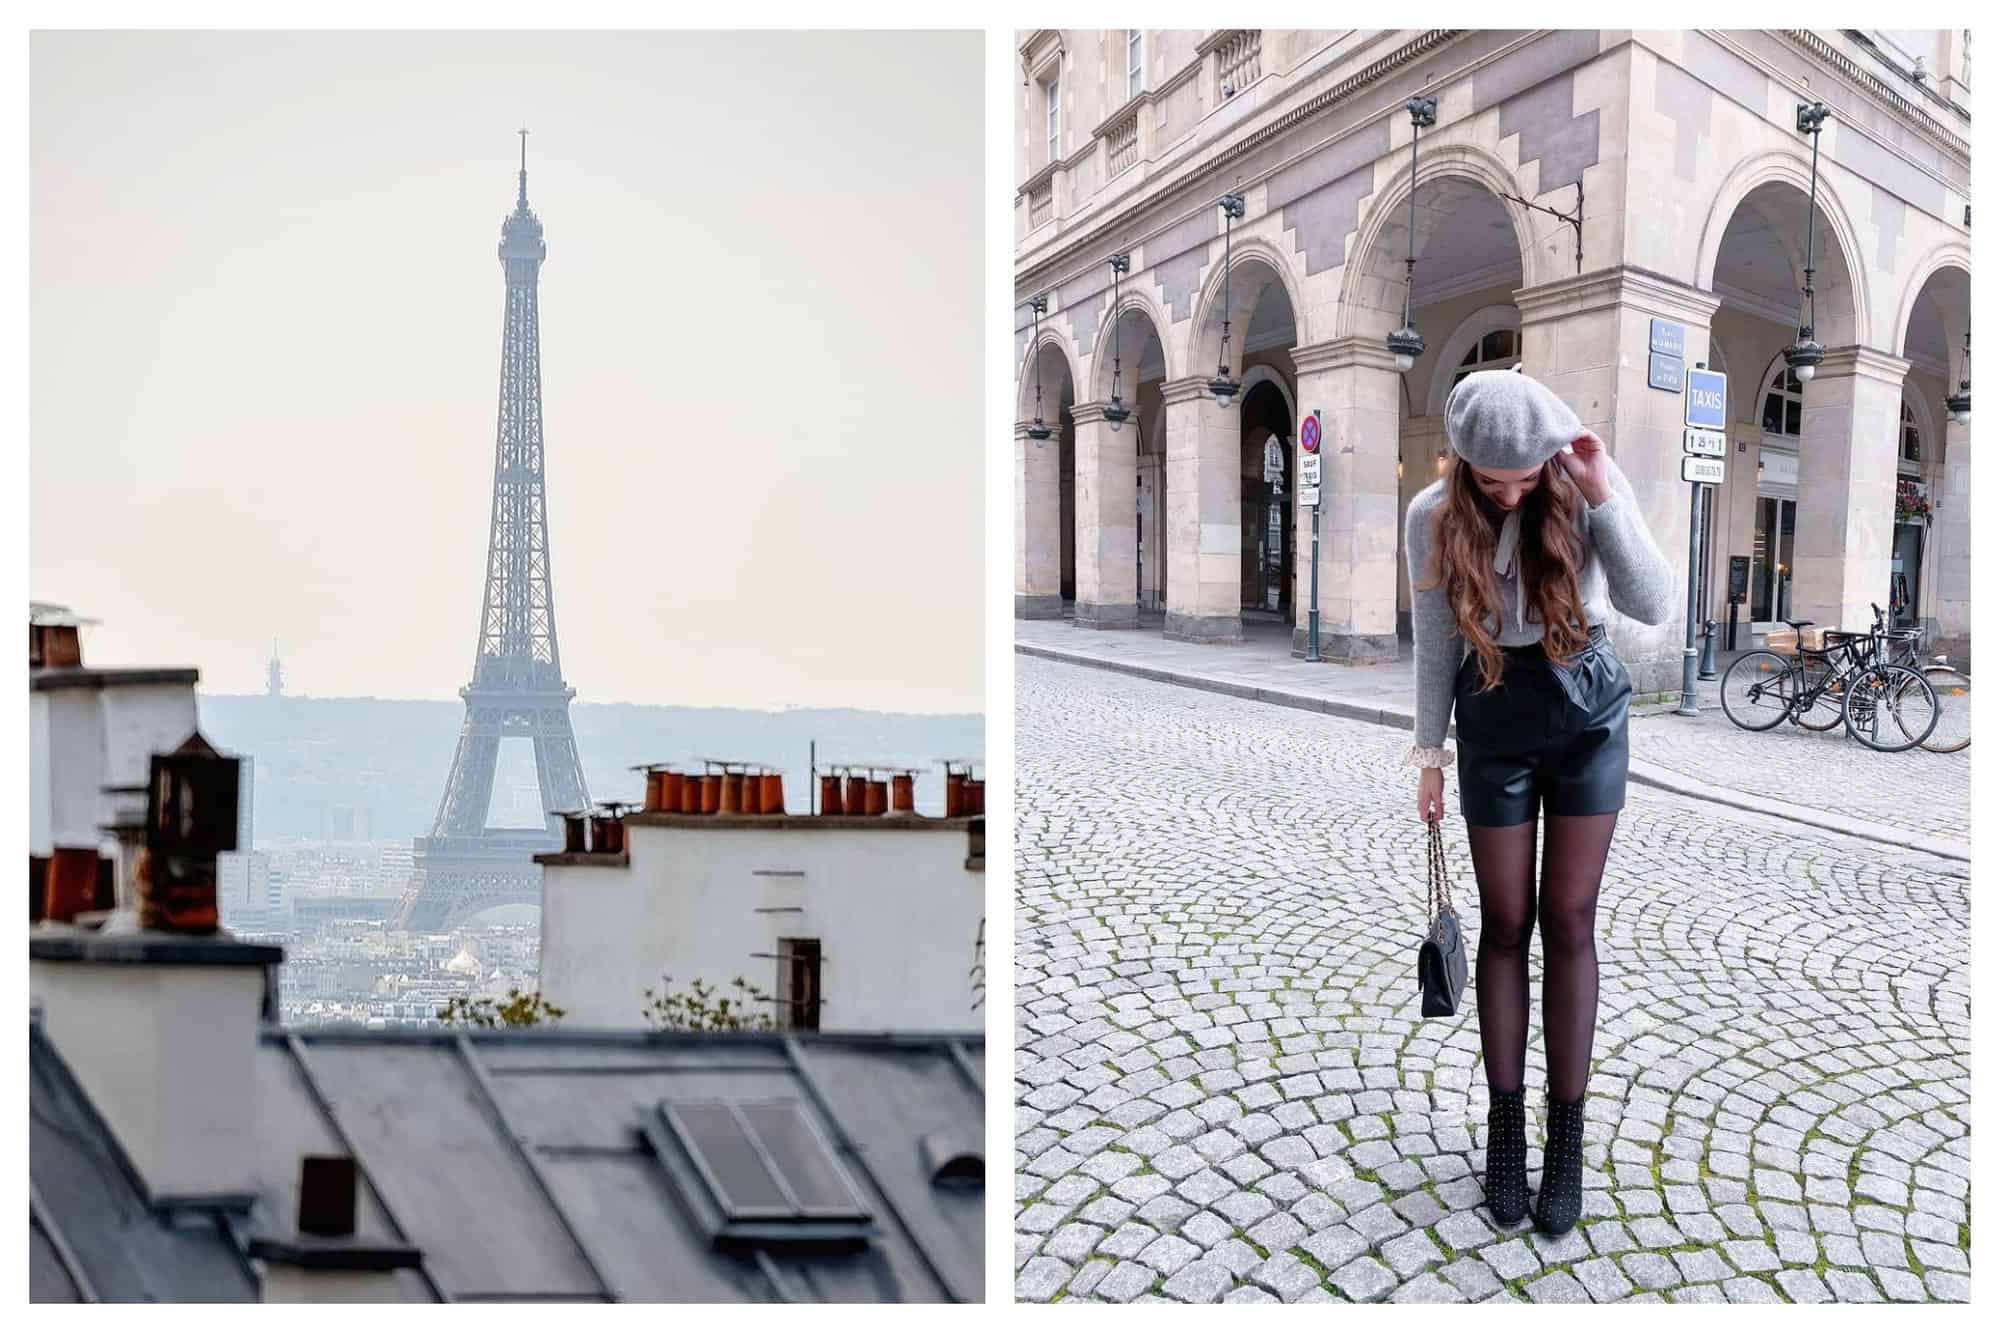 Left- The Eiffel Tower stands aganist a gray sky.
Right- A woman is dressed in a gray beret, gray cashmere sweater, black shorts, black tights, and black boots. 